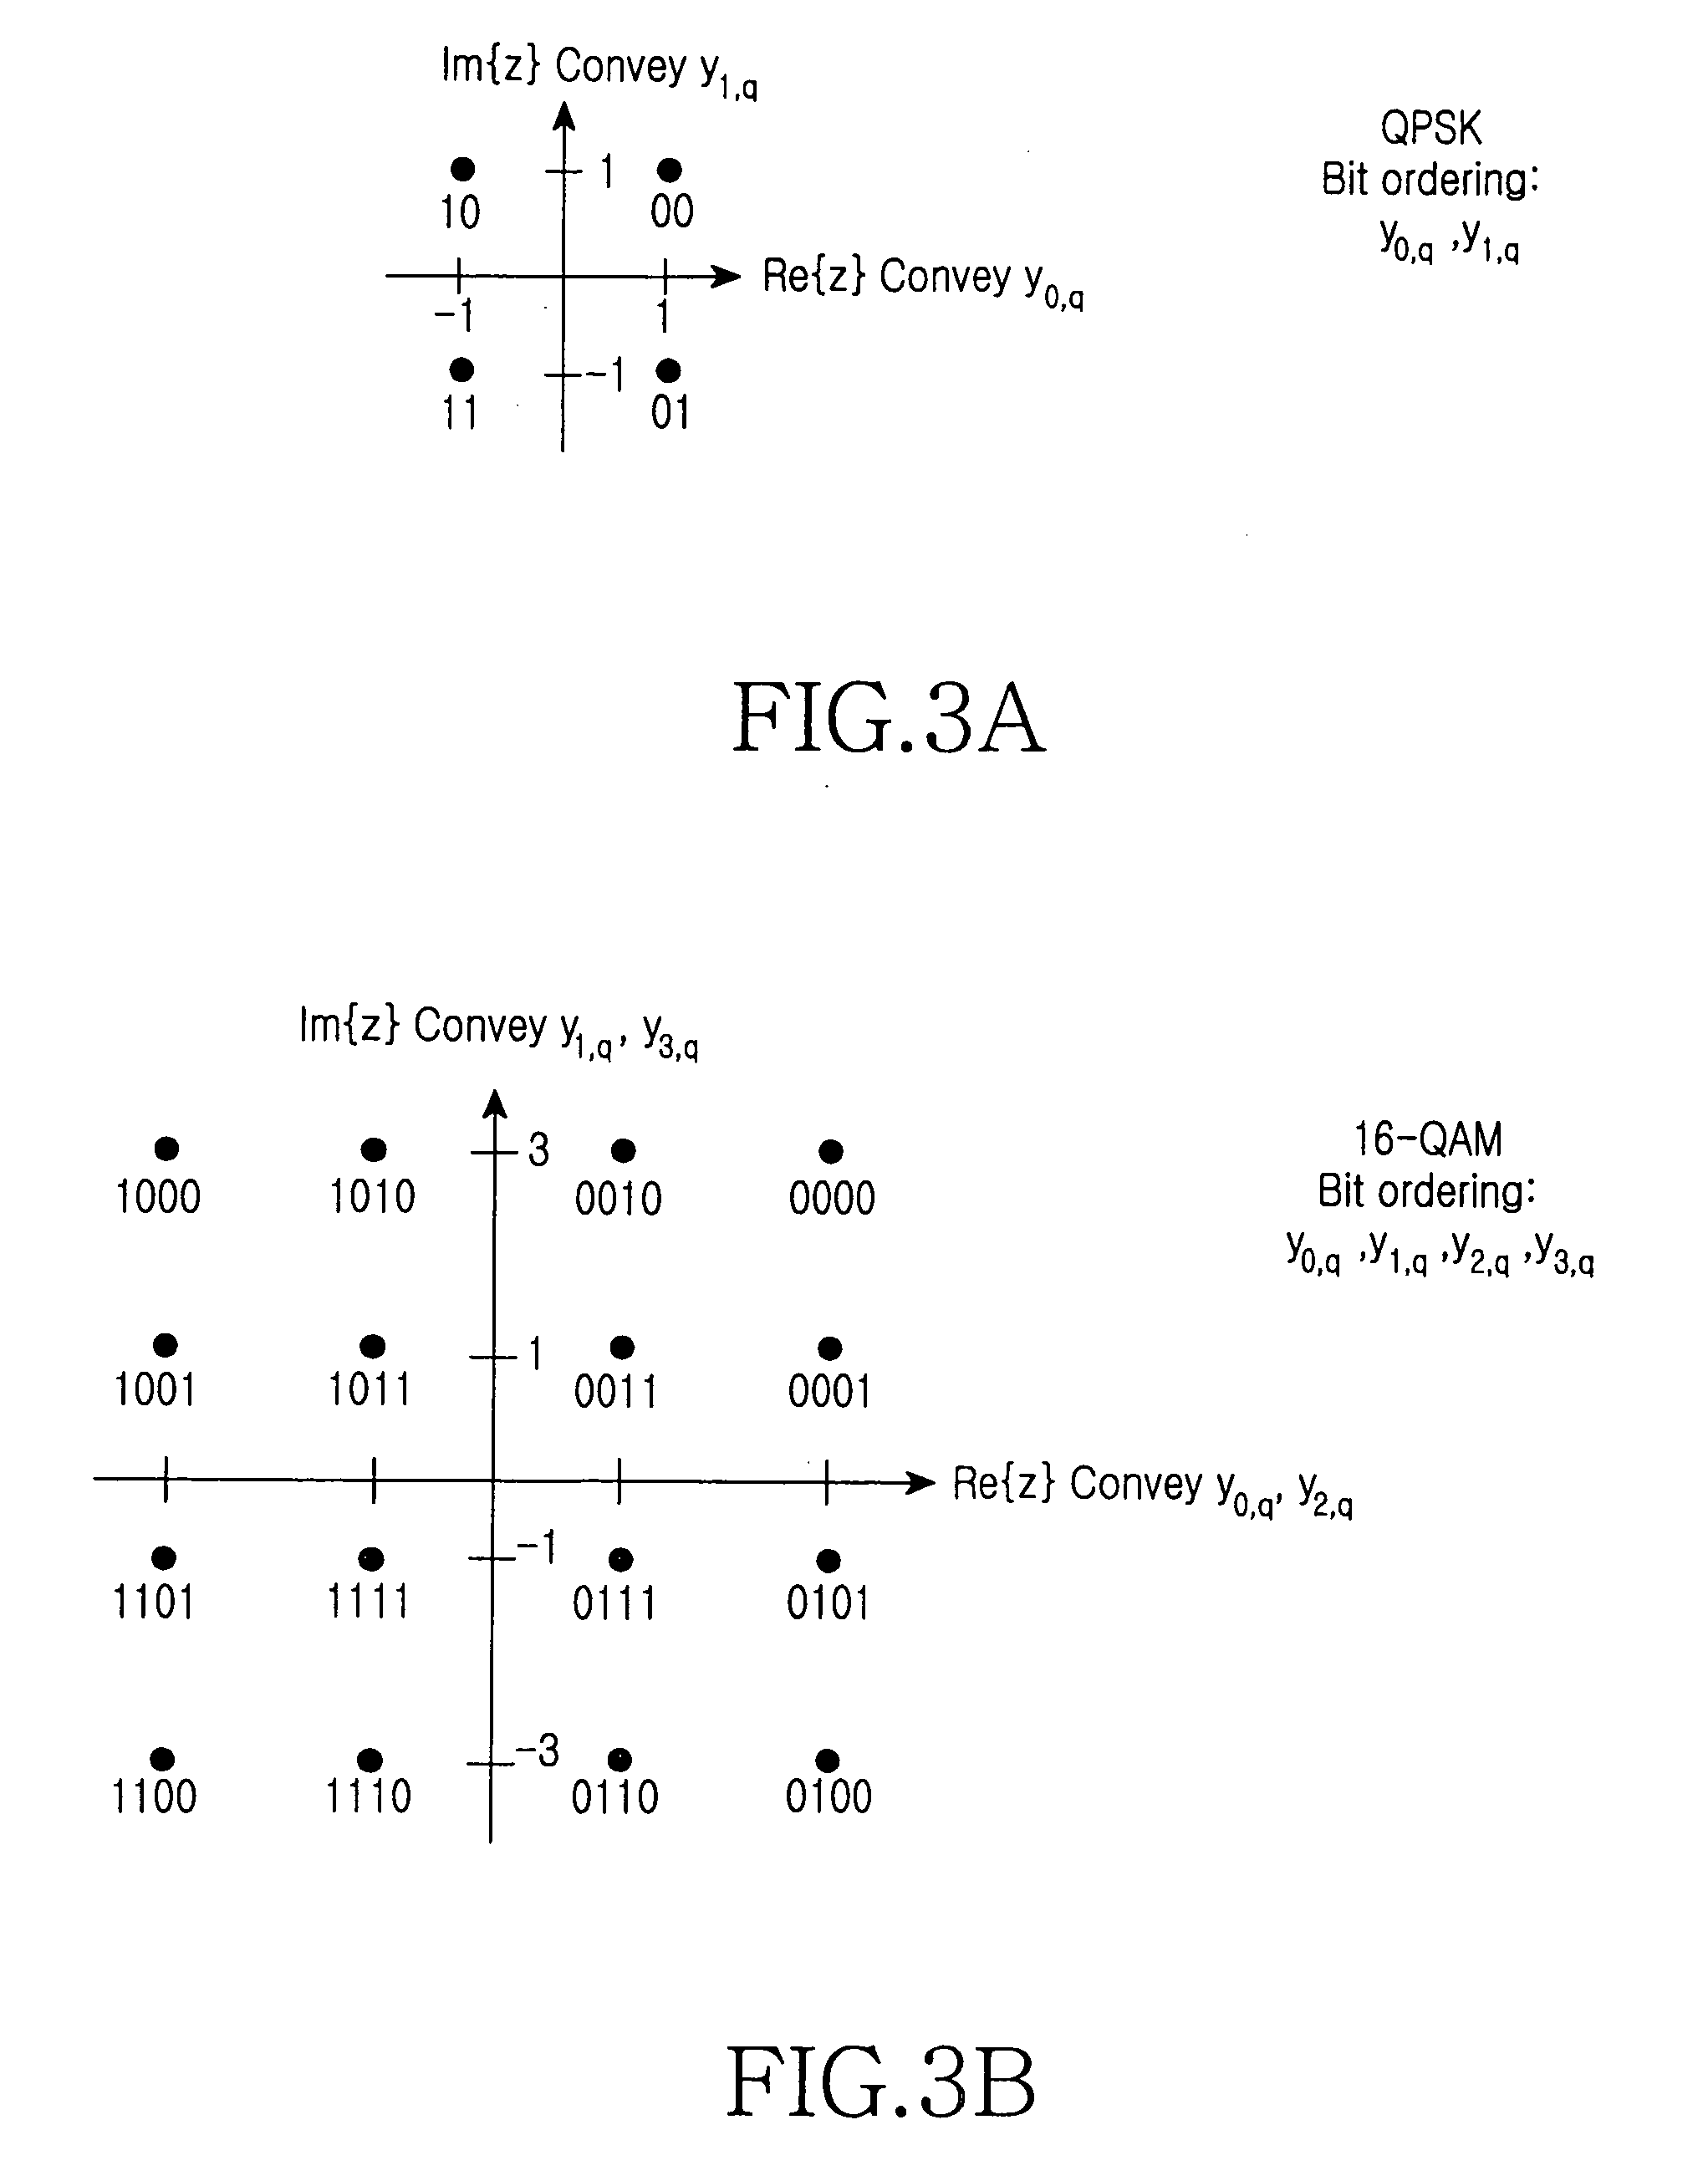 Apparatus and method for transmitting and receiving data in a communication system using low density parity check codes